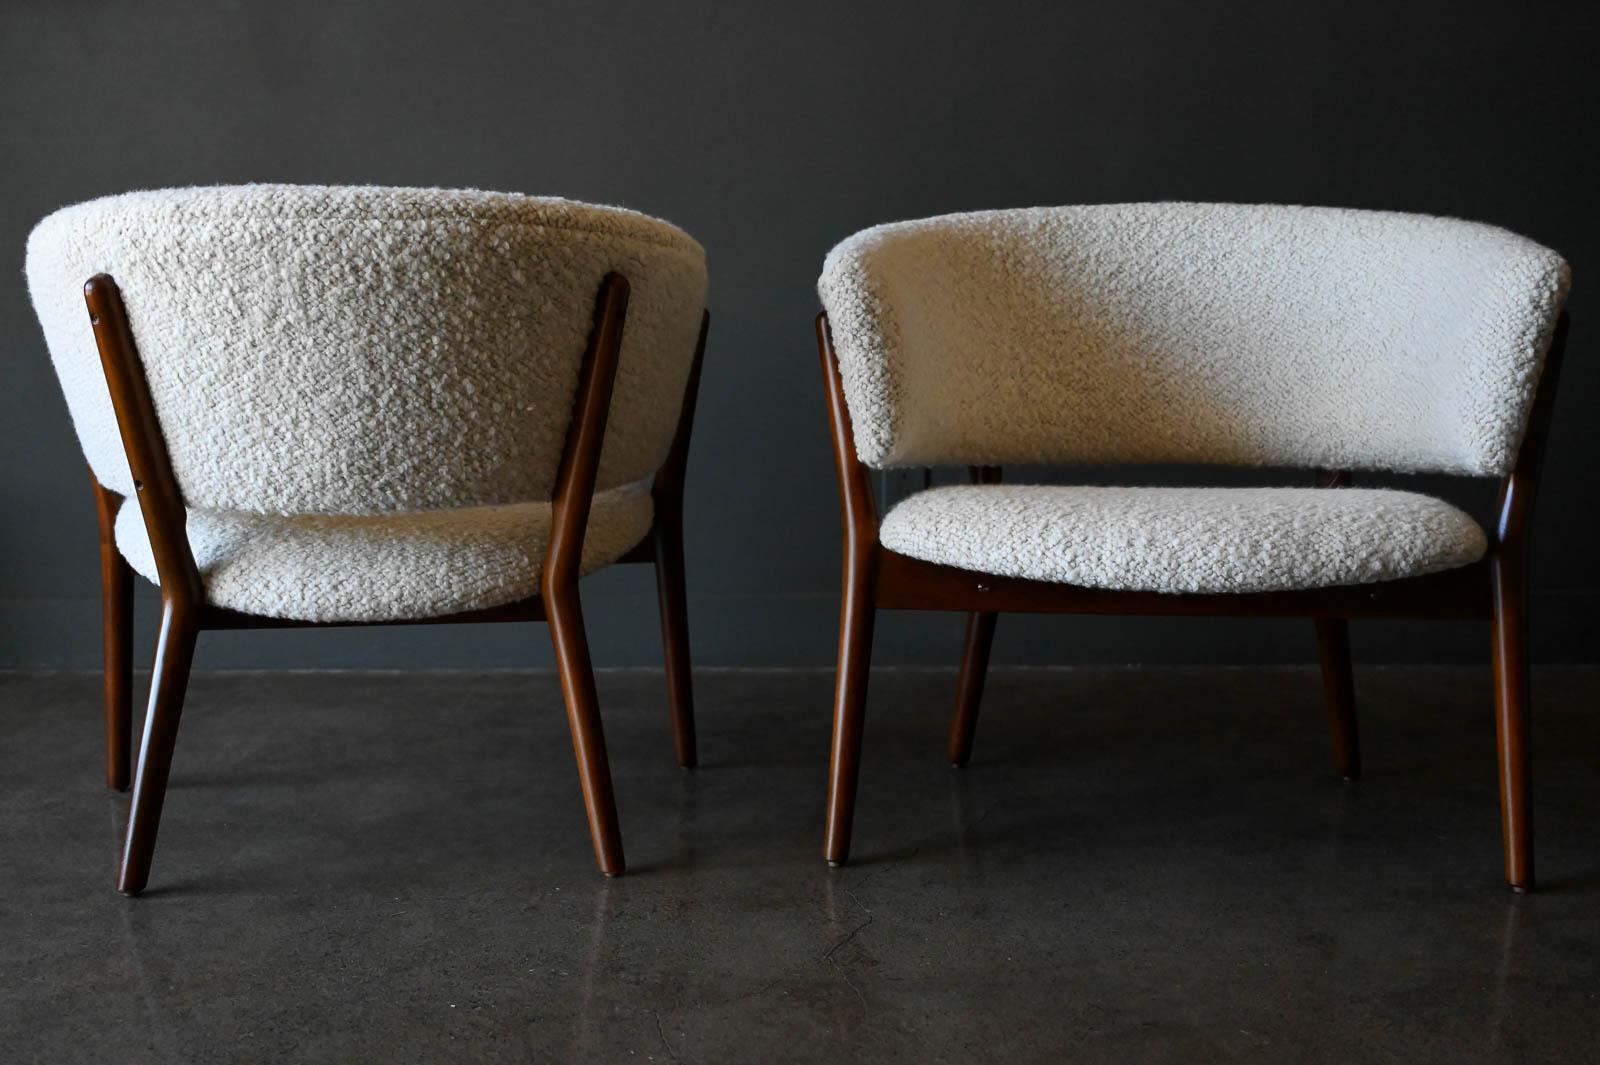 Pair of Nanna Ditzel Model 83 Lounge Chairs in Pierre Frey Wool Bouclé, 1952 For Sale 6